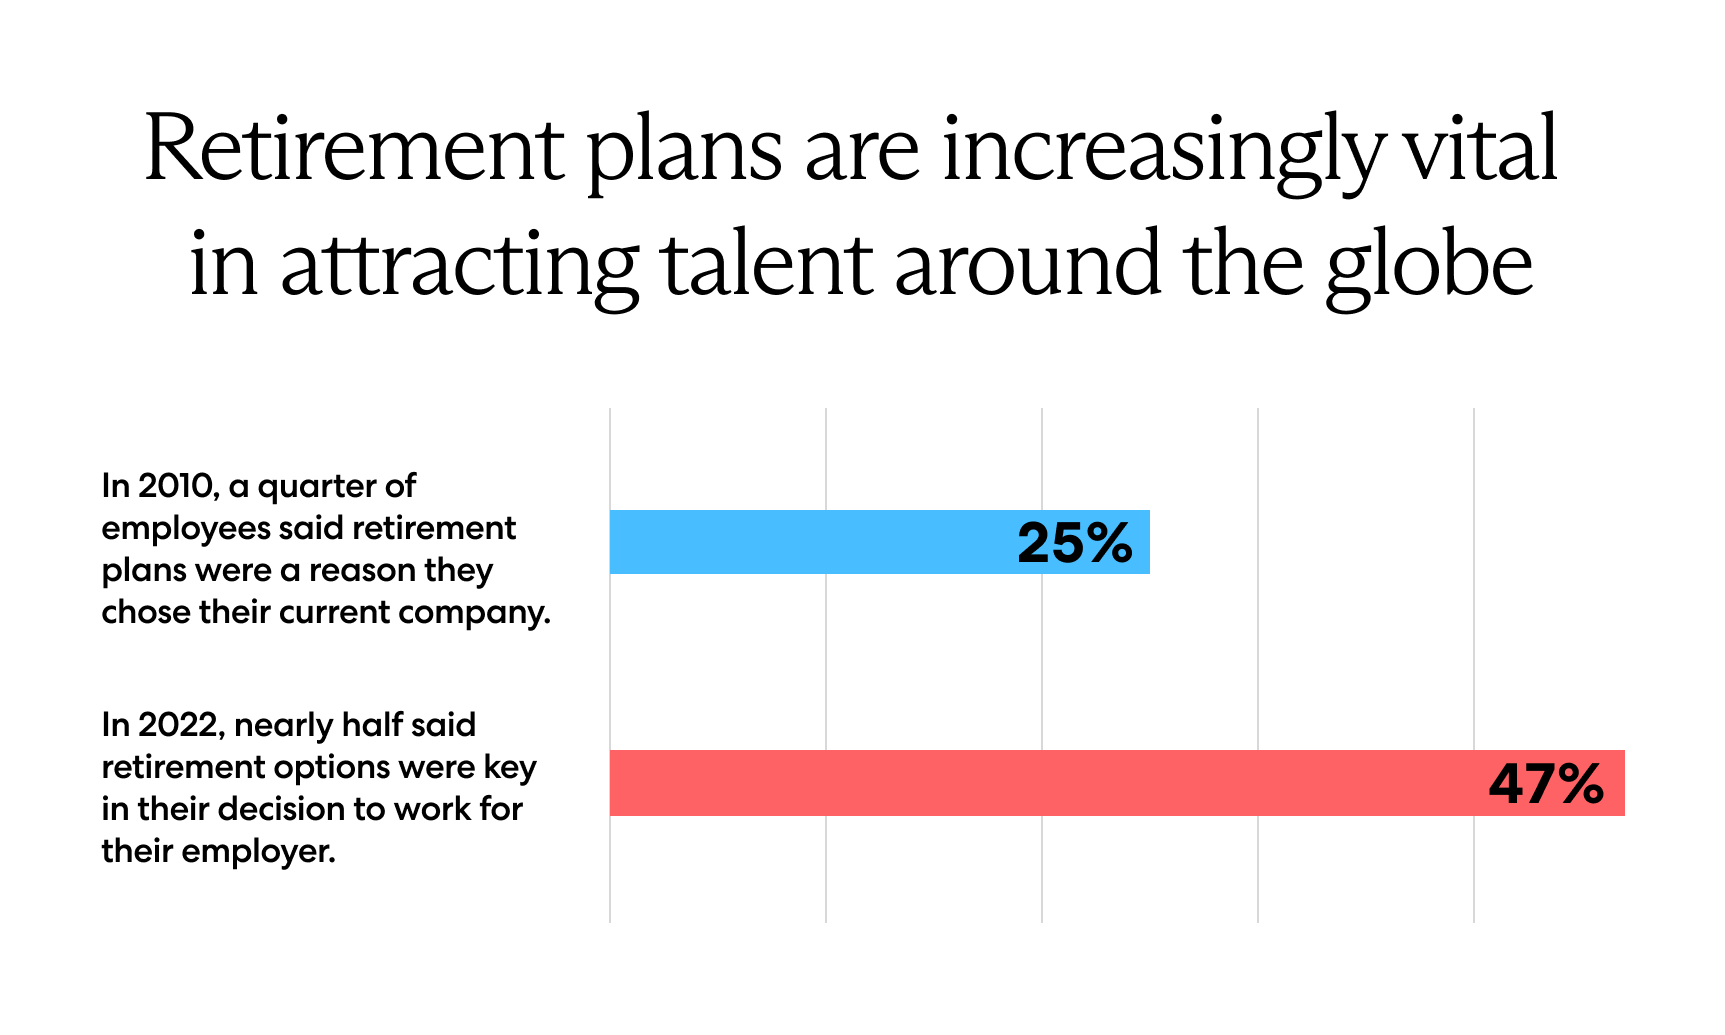 Retirement plans are increasingly vital in attracting talent around the globe